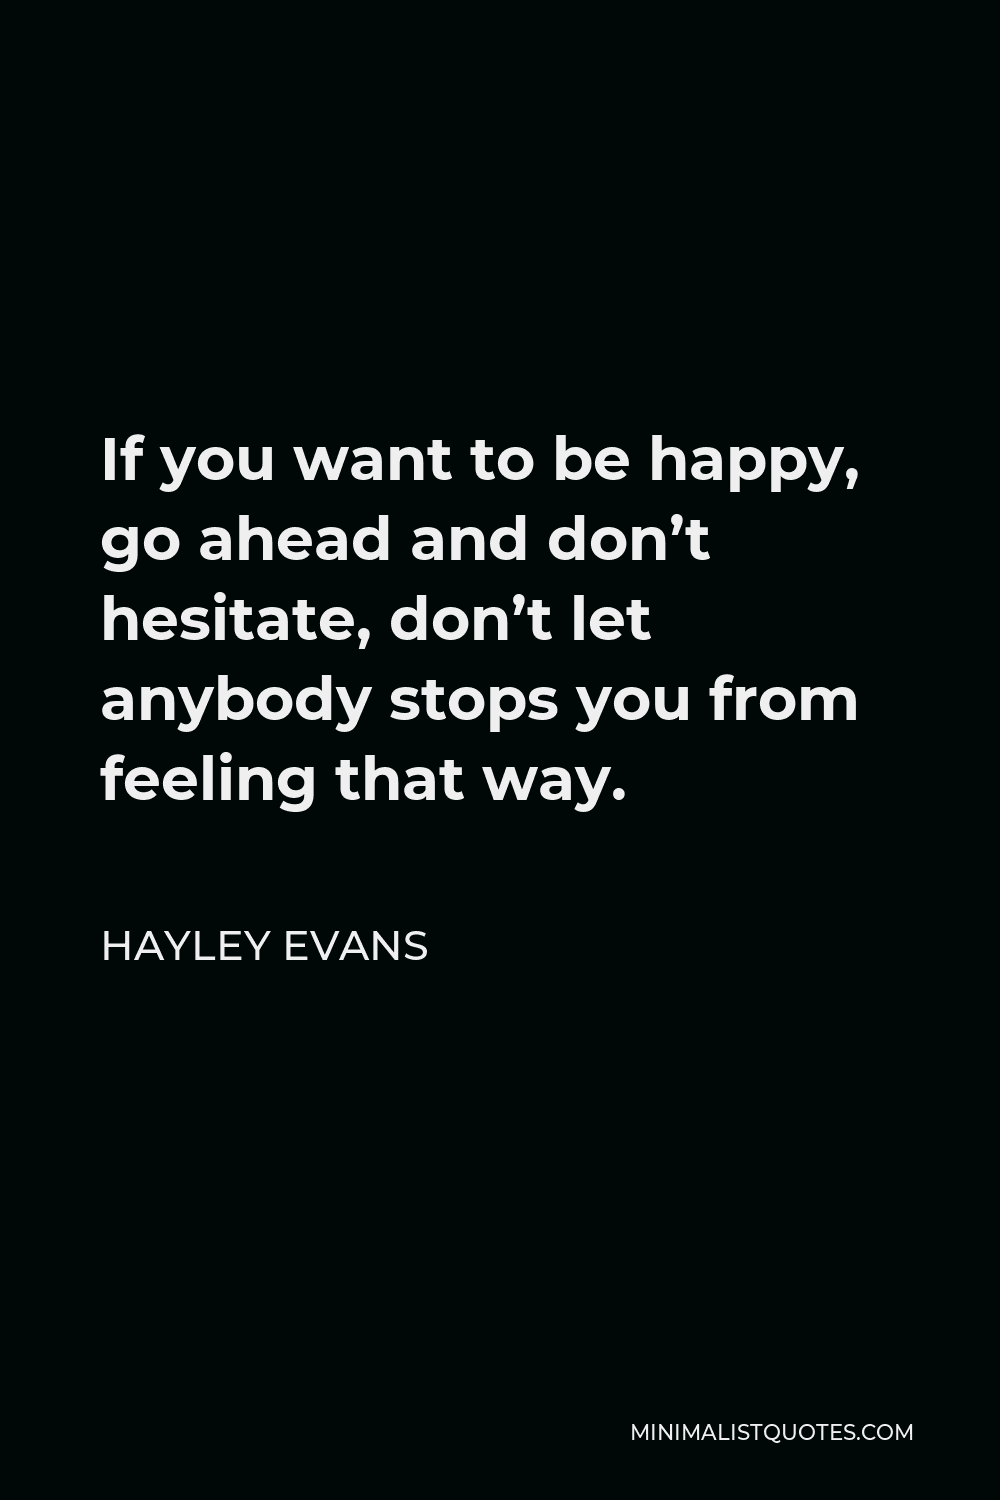 Hayley Evans Quote - If you want to be happy, go ahead and don’t hesitate, don’t let anybody stops you from feeling that way.